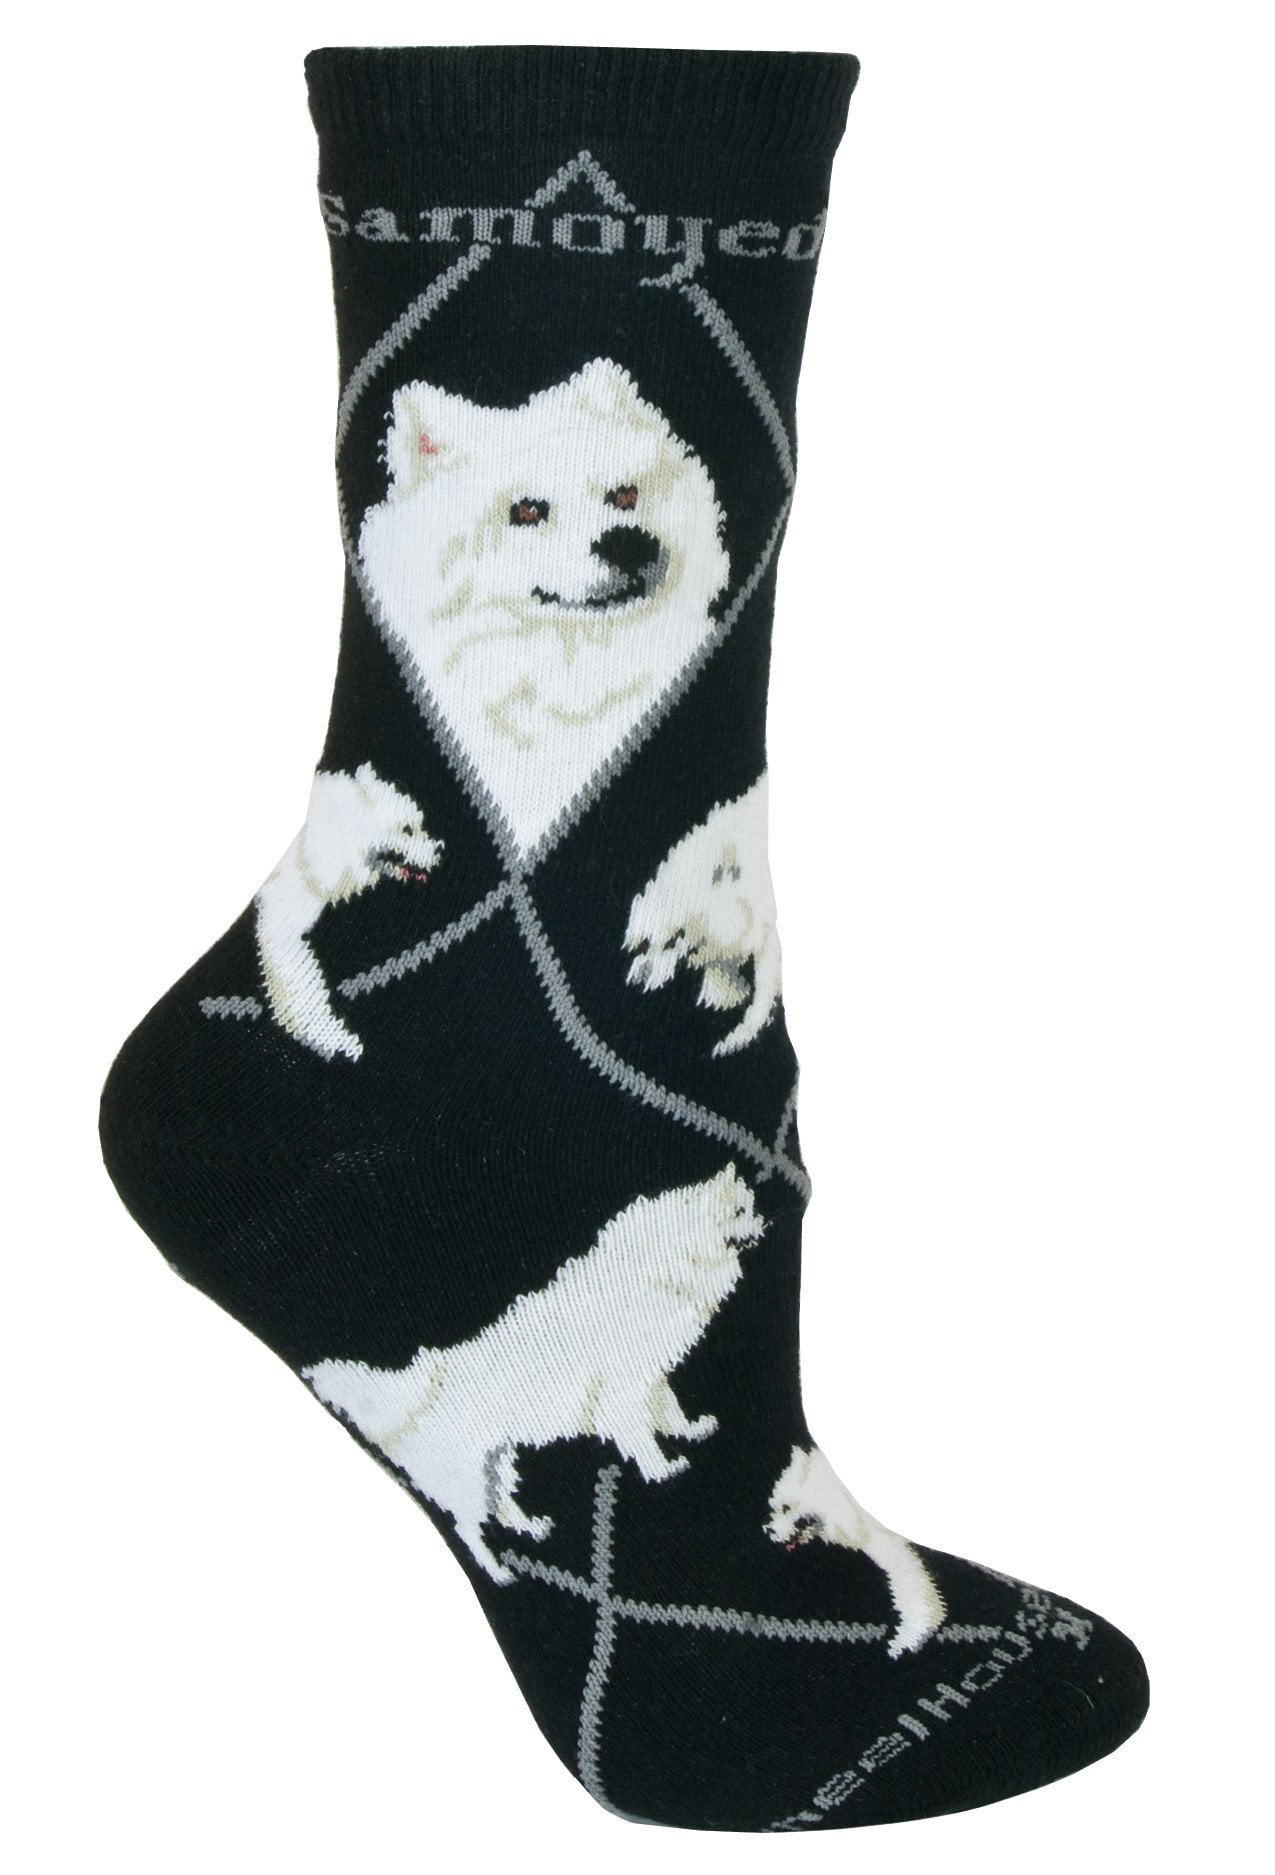 Socks Fox Terrier Dog Ladies Navy Blue Red Bamboo Cotton Blend Cute Dogs